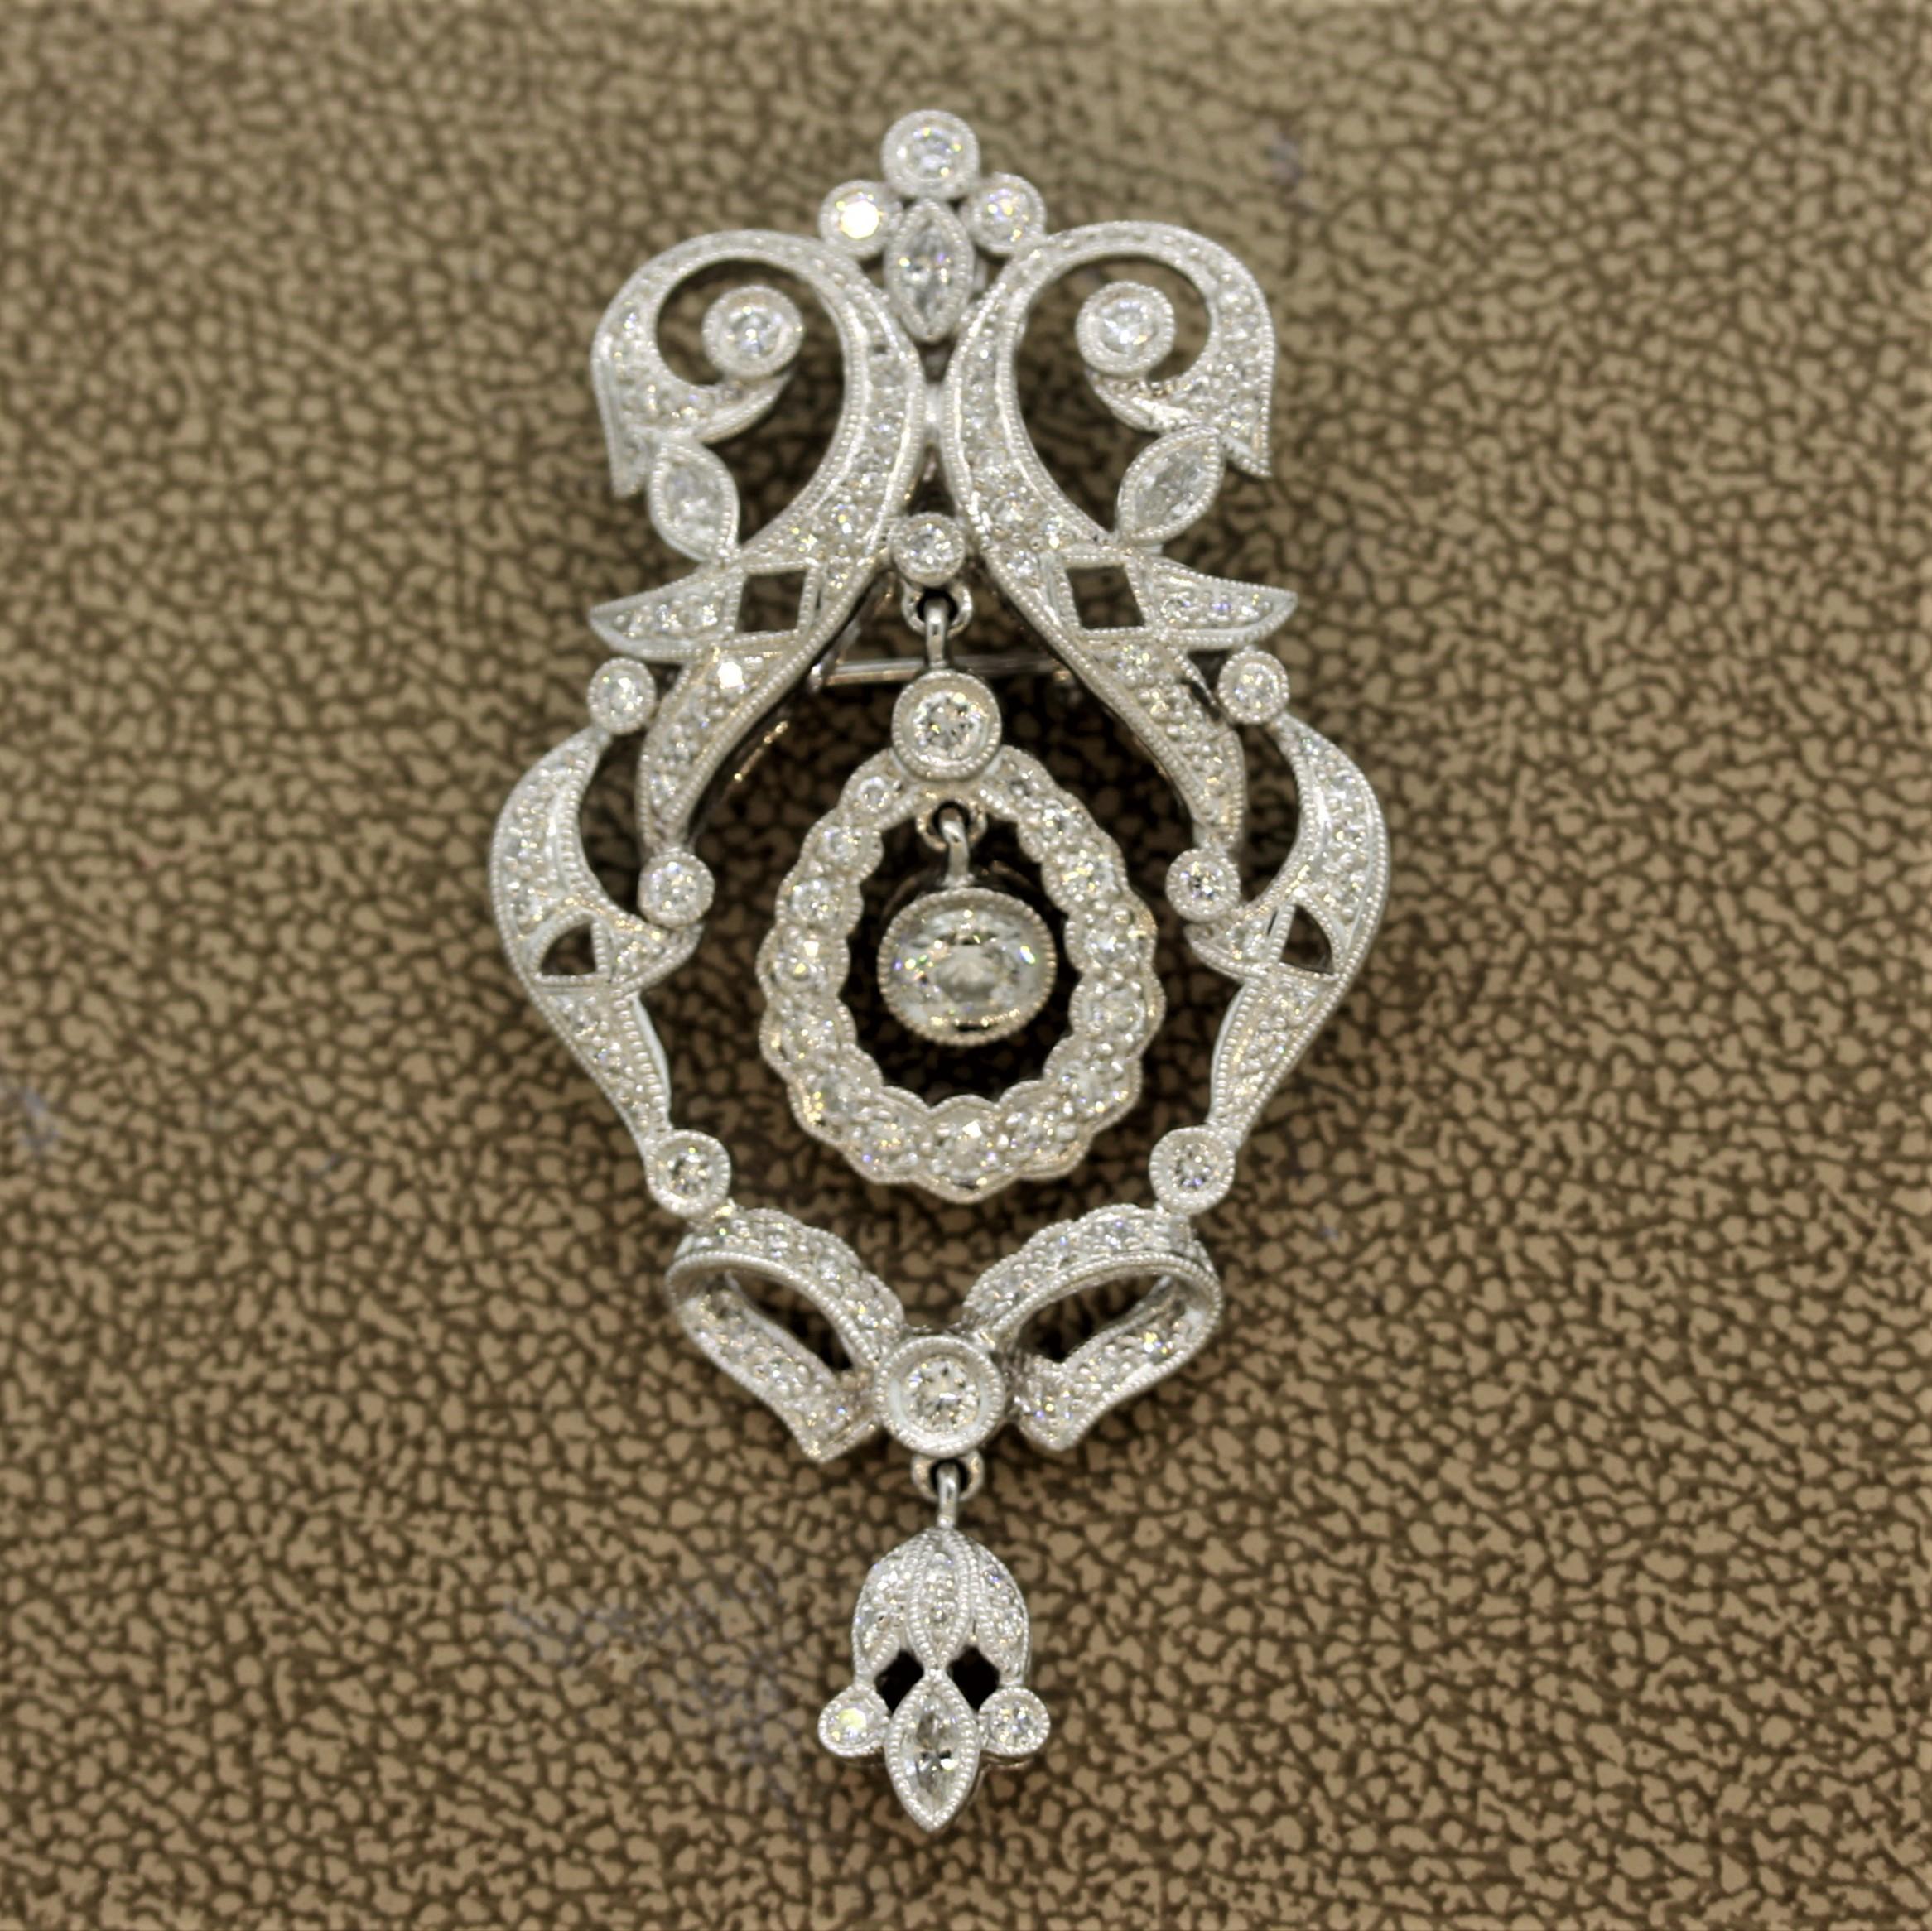 A true mid-century treasure, circa 1960, featuring 1.44 carats of round brilliant and marquise shaped diamonds. They are set around beautifully worked filigree and millgrain settings. The center drop has a diamond dangle in the center along with a